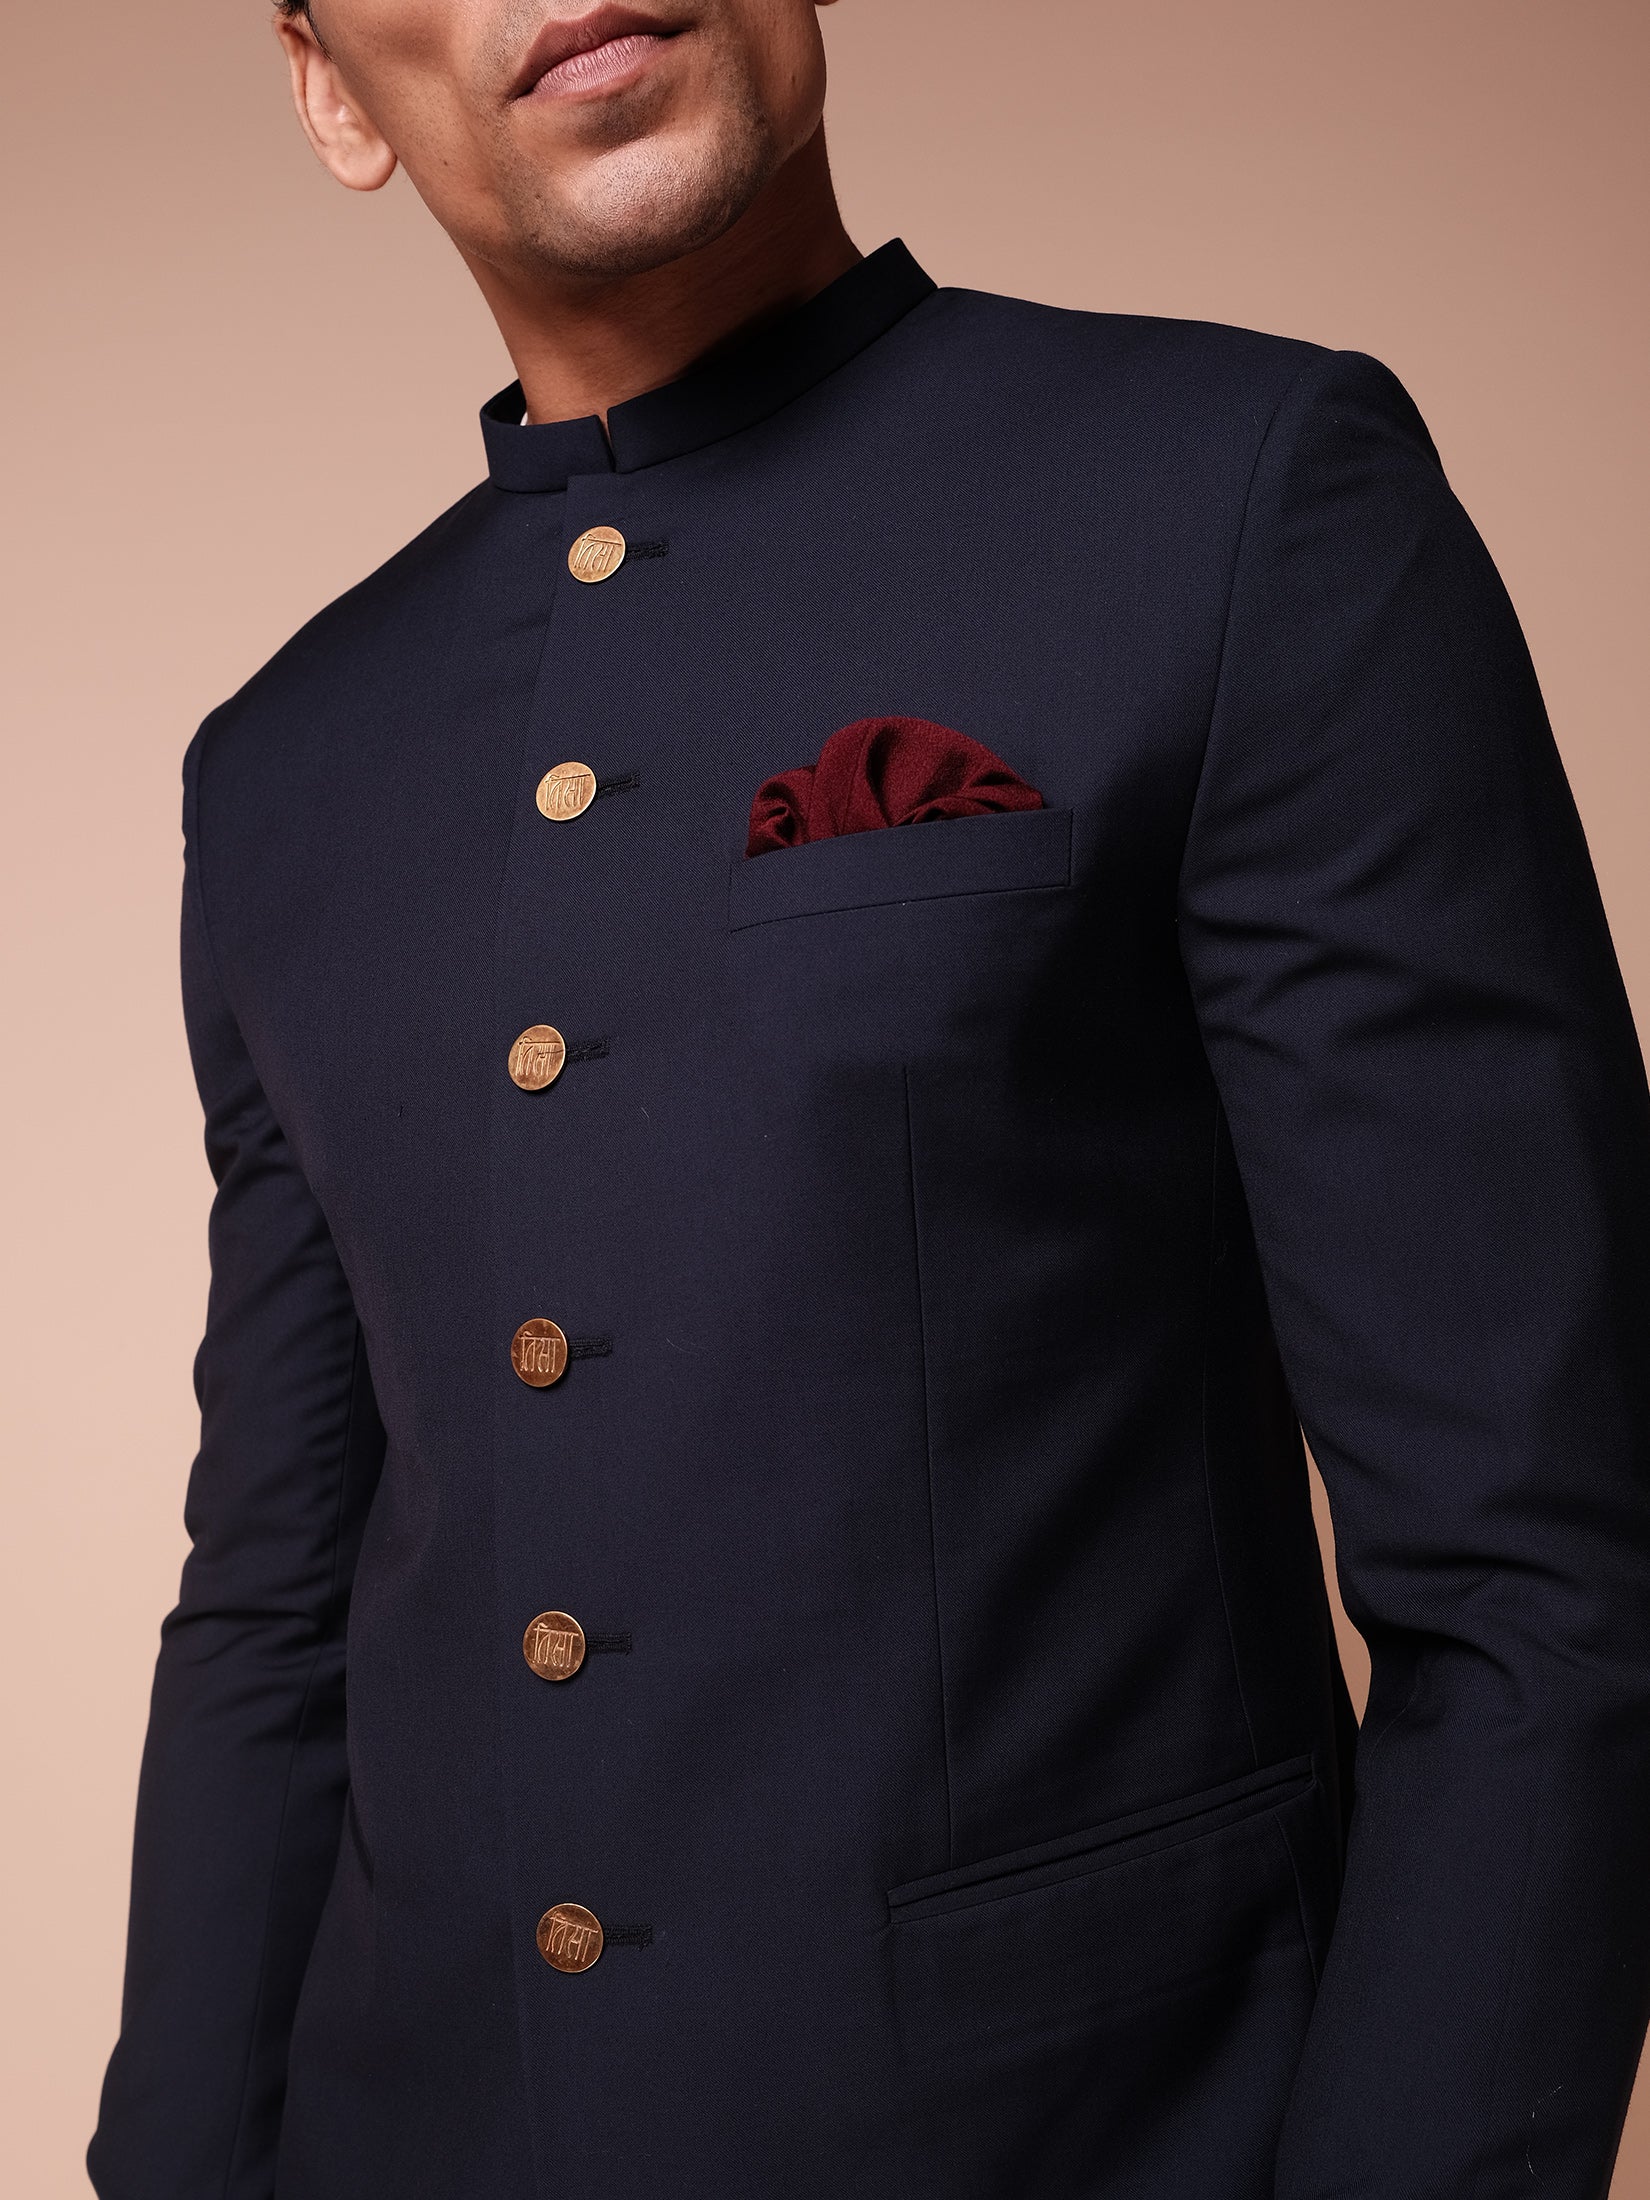 Midnight Blue Bandhgala With Signature Tisa Buttons Paired With Trousers